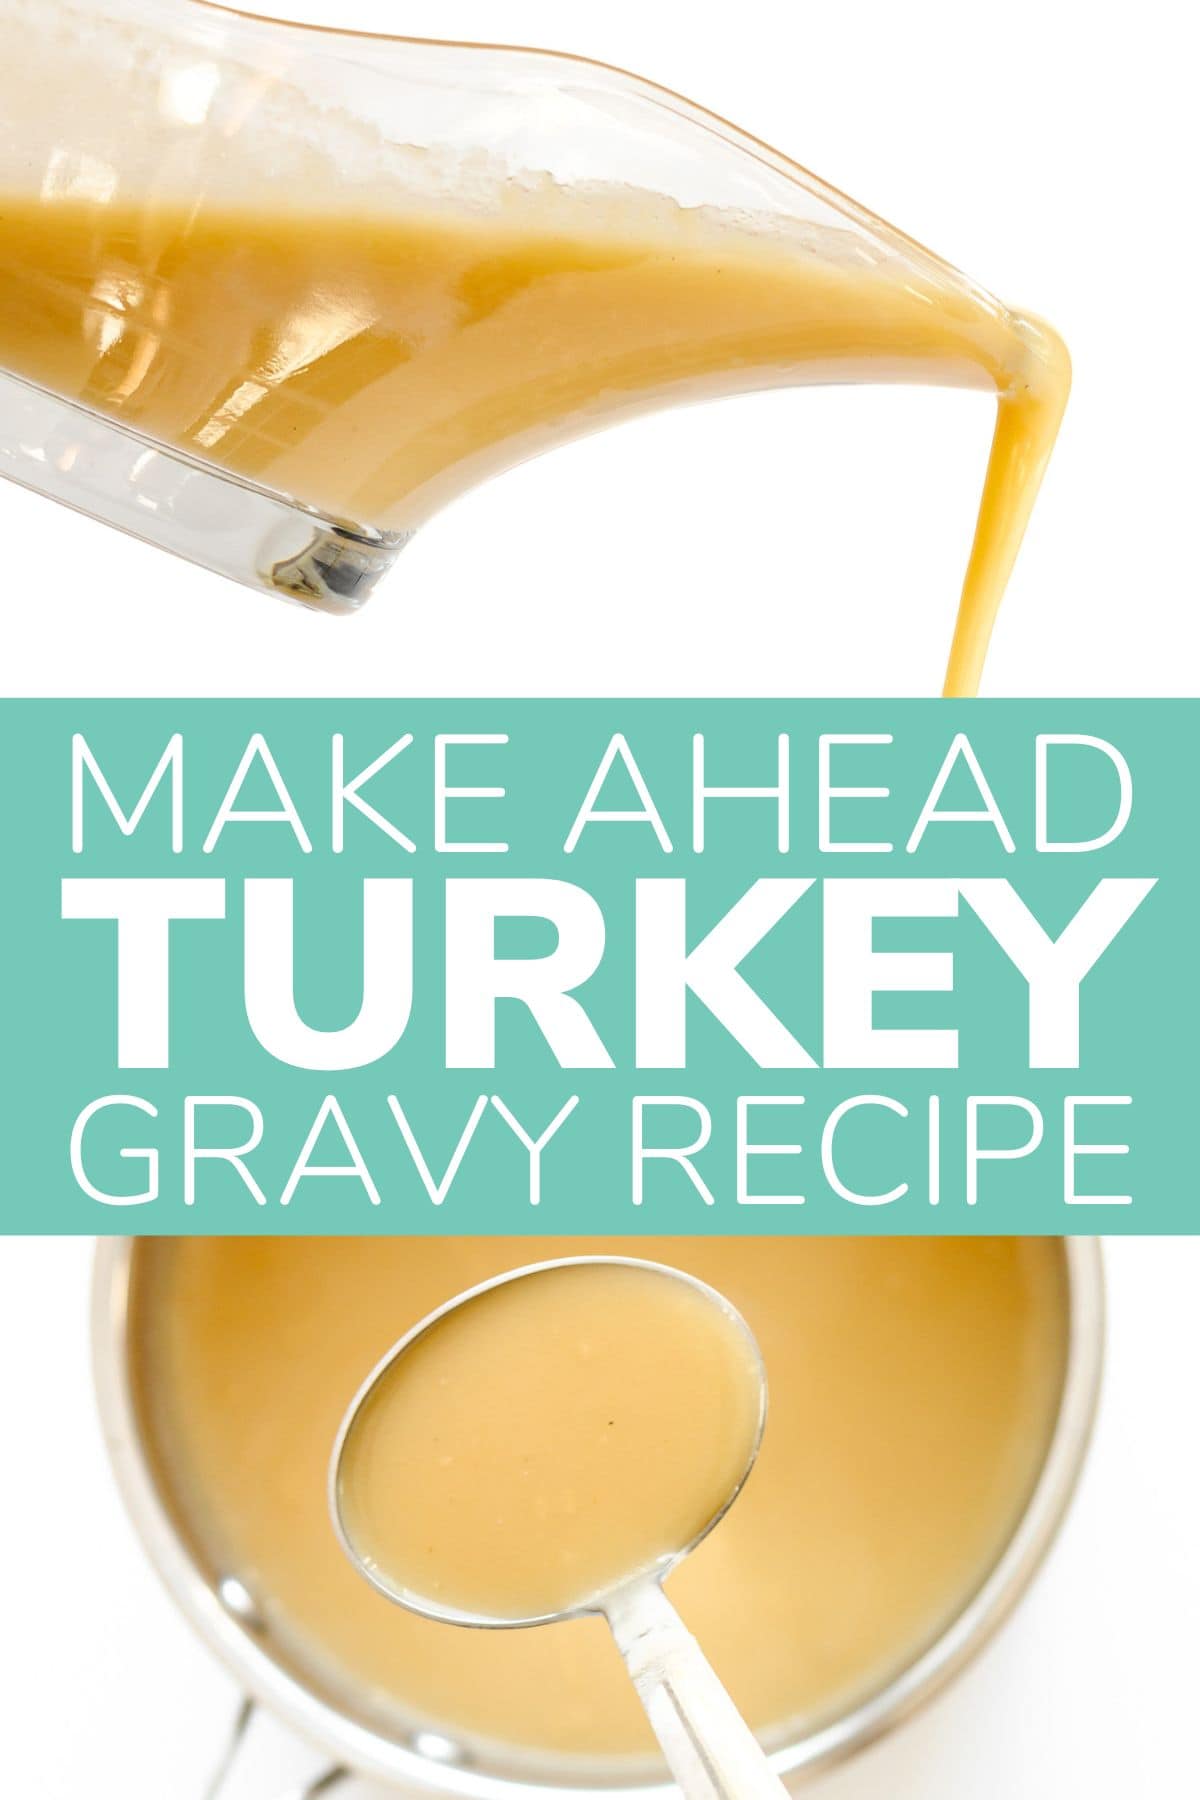 Collage graphic showing two photos of turkey gravy with text overlay "Make Ahead Turkey Gravy Recipe".